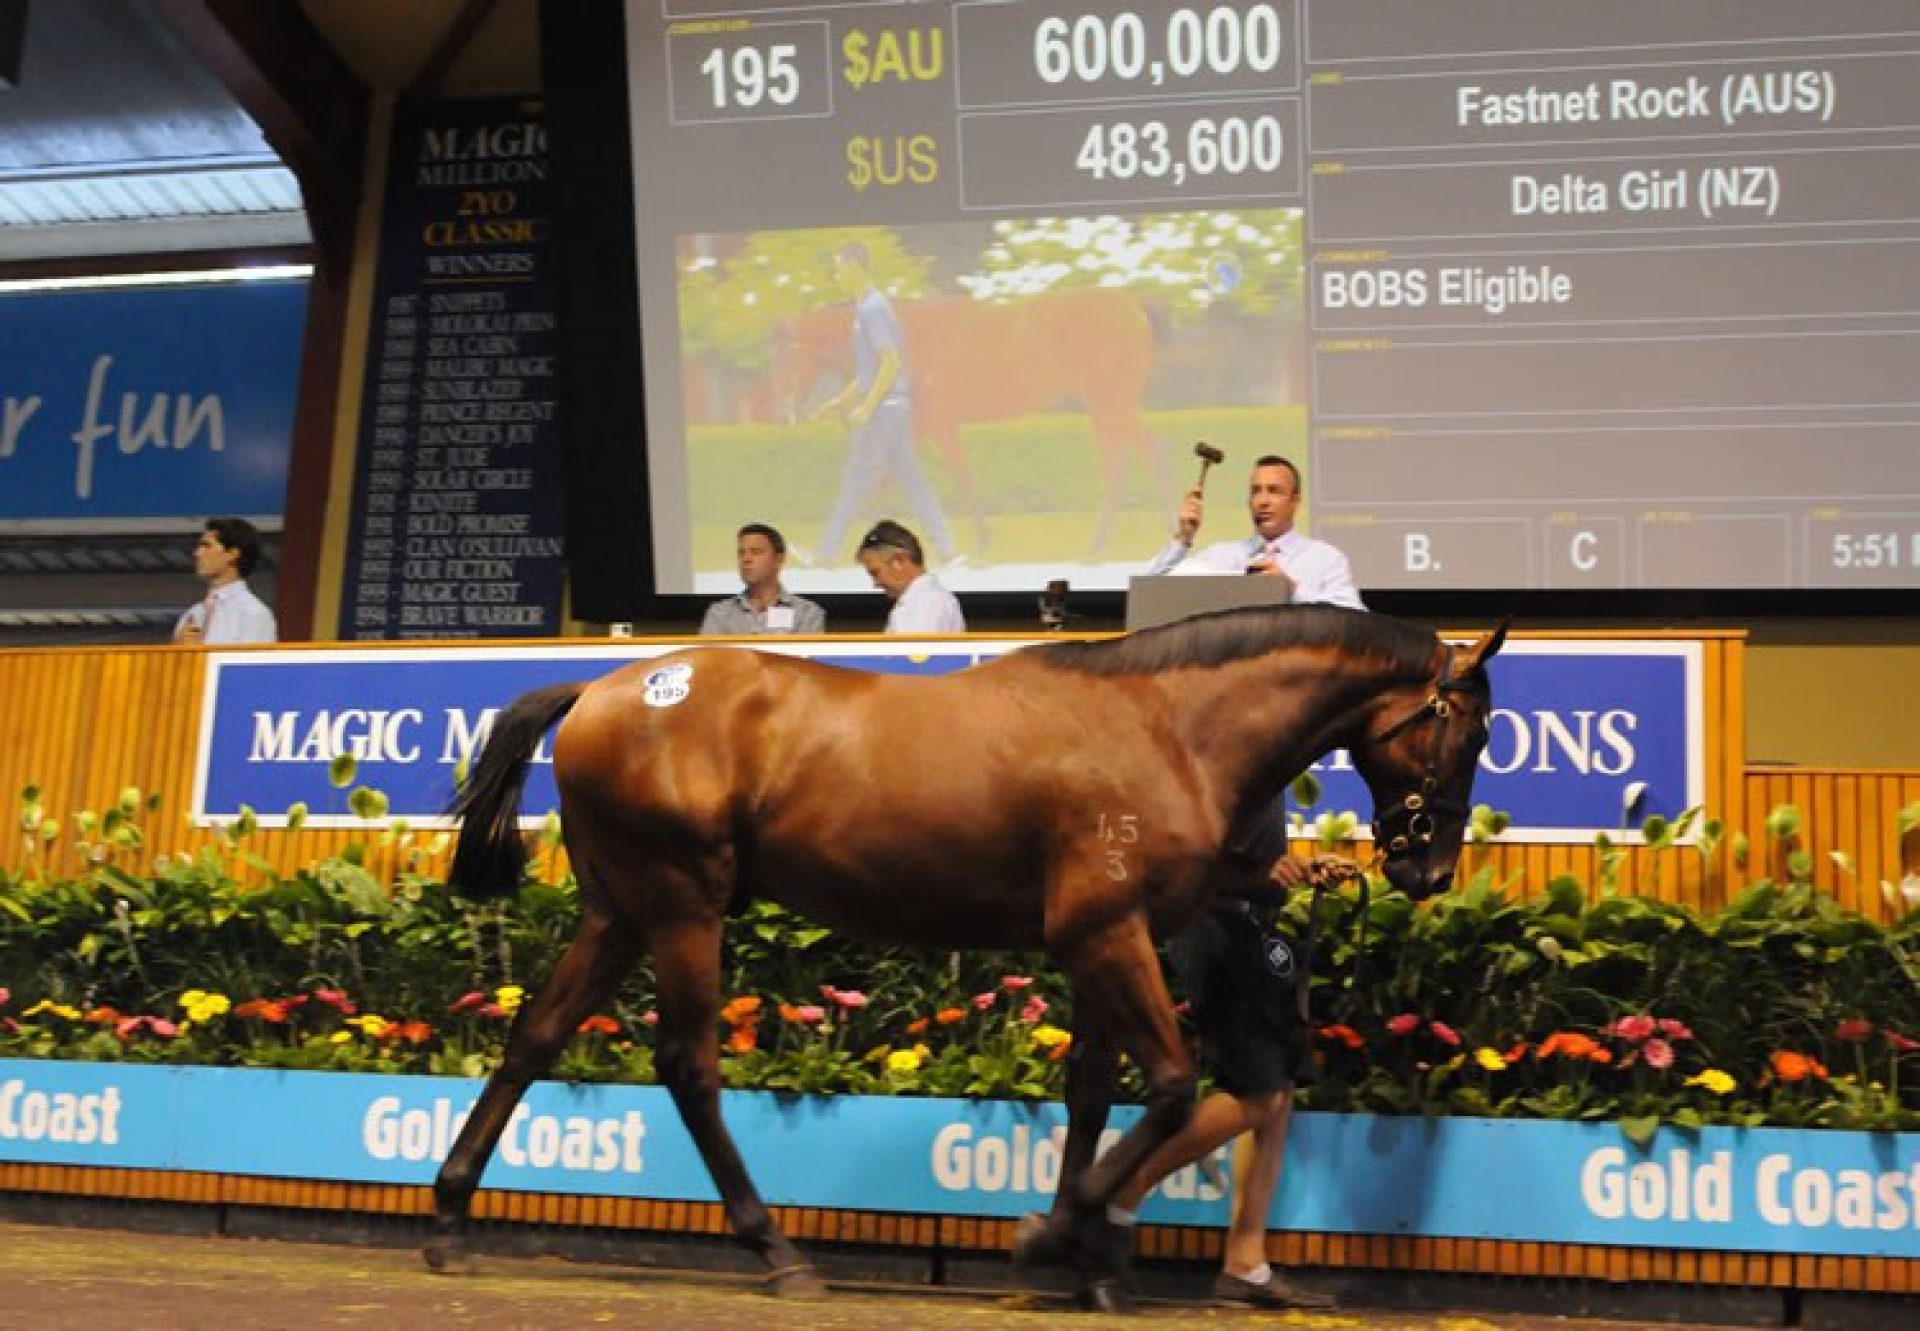 Fastnet Rock ex Delta Girl yearling colt selling for $600,000 at the 2015 Magic Millions Yearling Sale